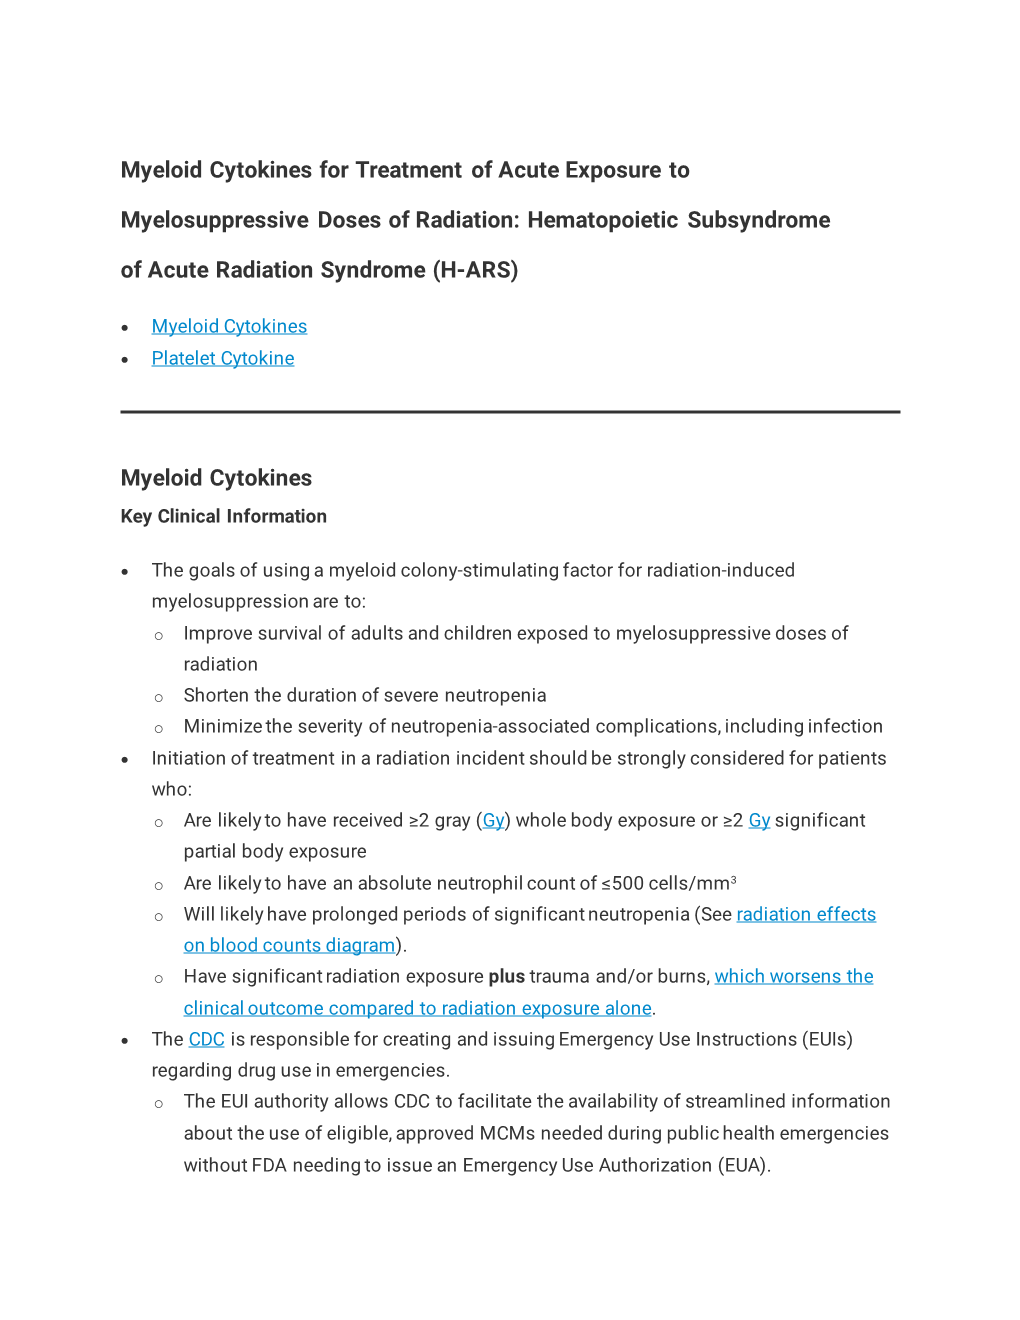 Myeloid Cytokines for Treatment of Acute Exposure To